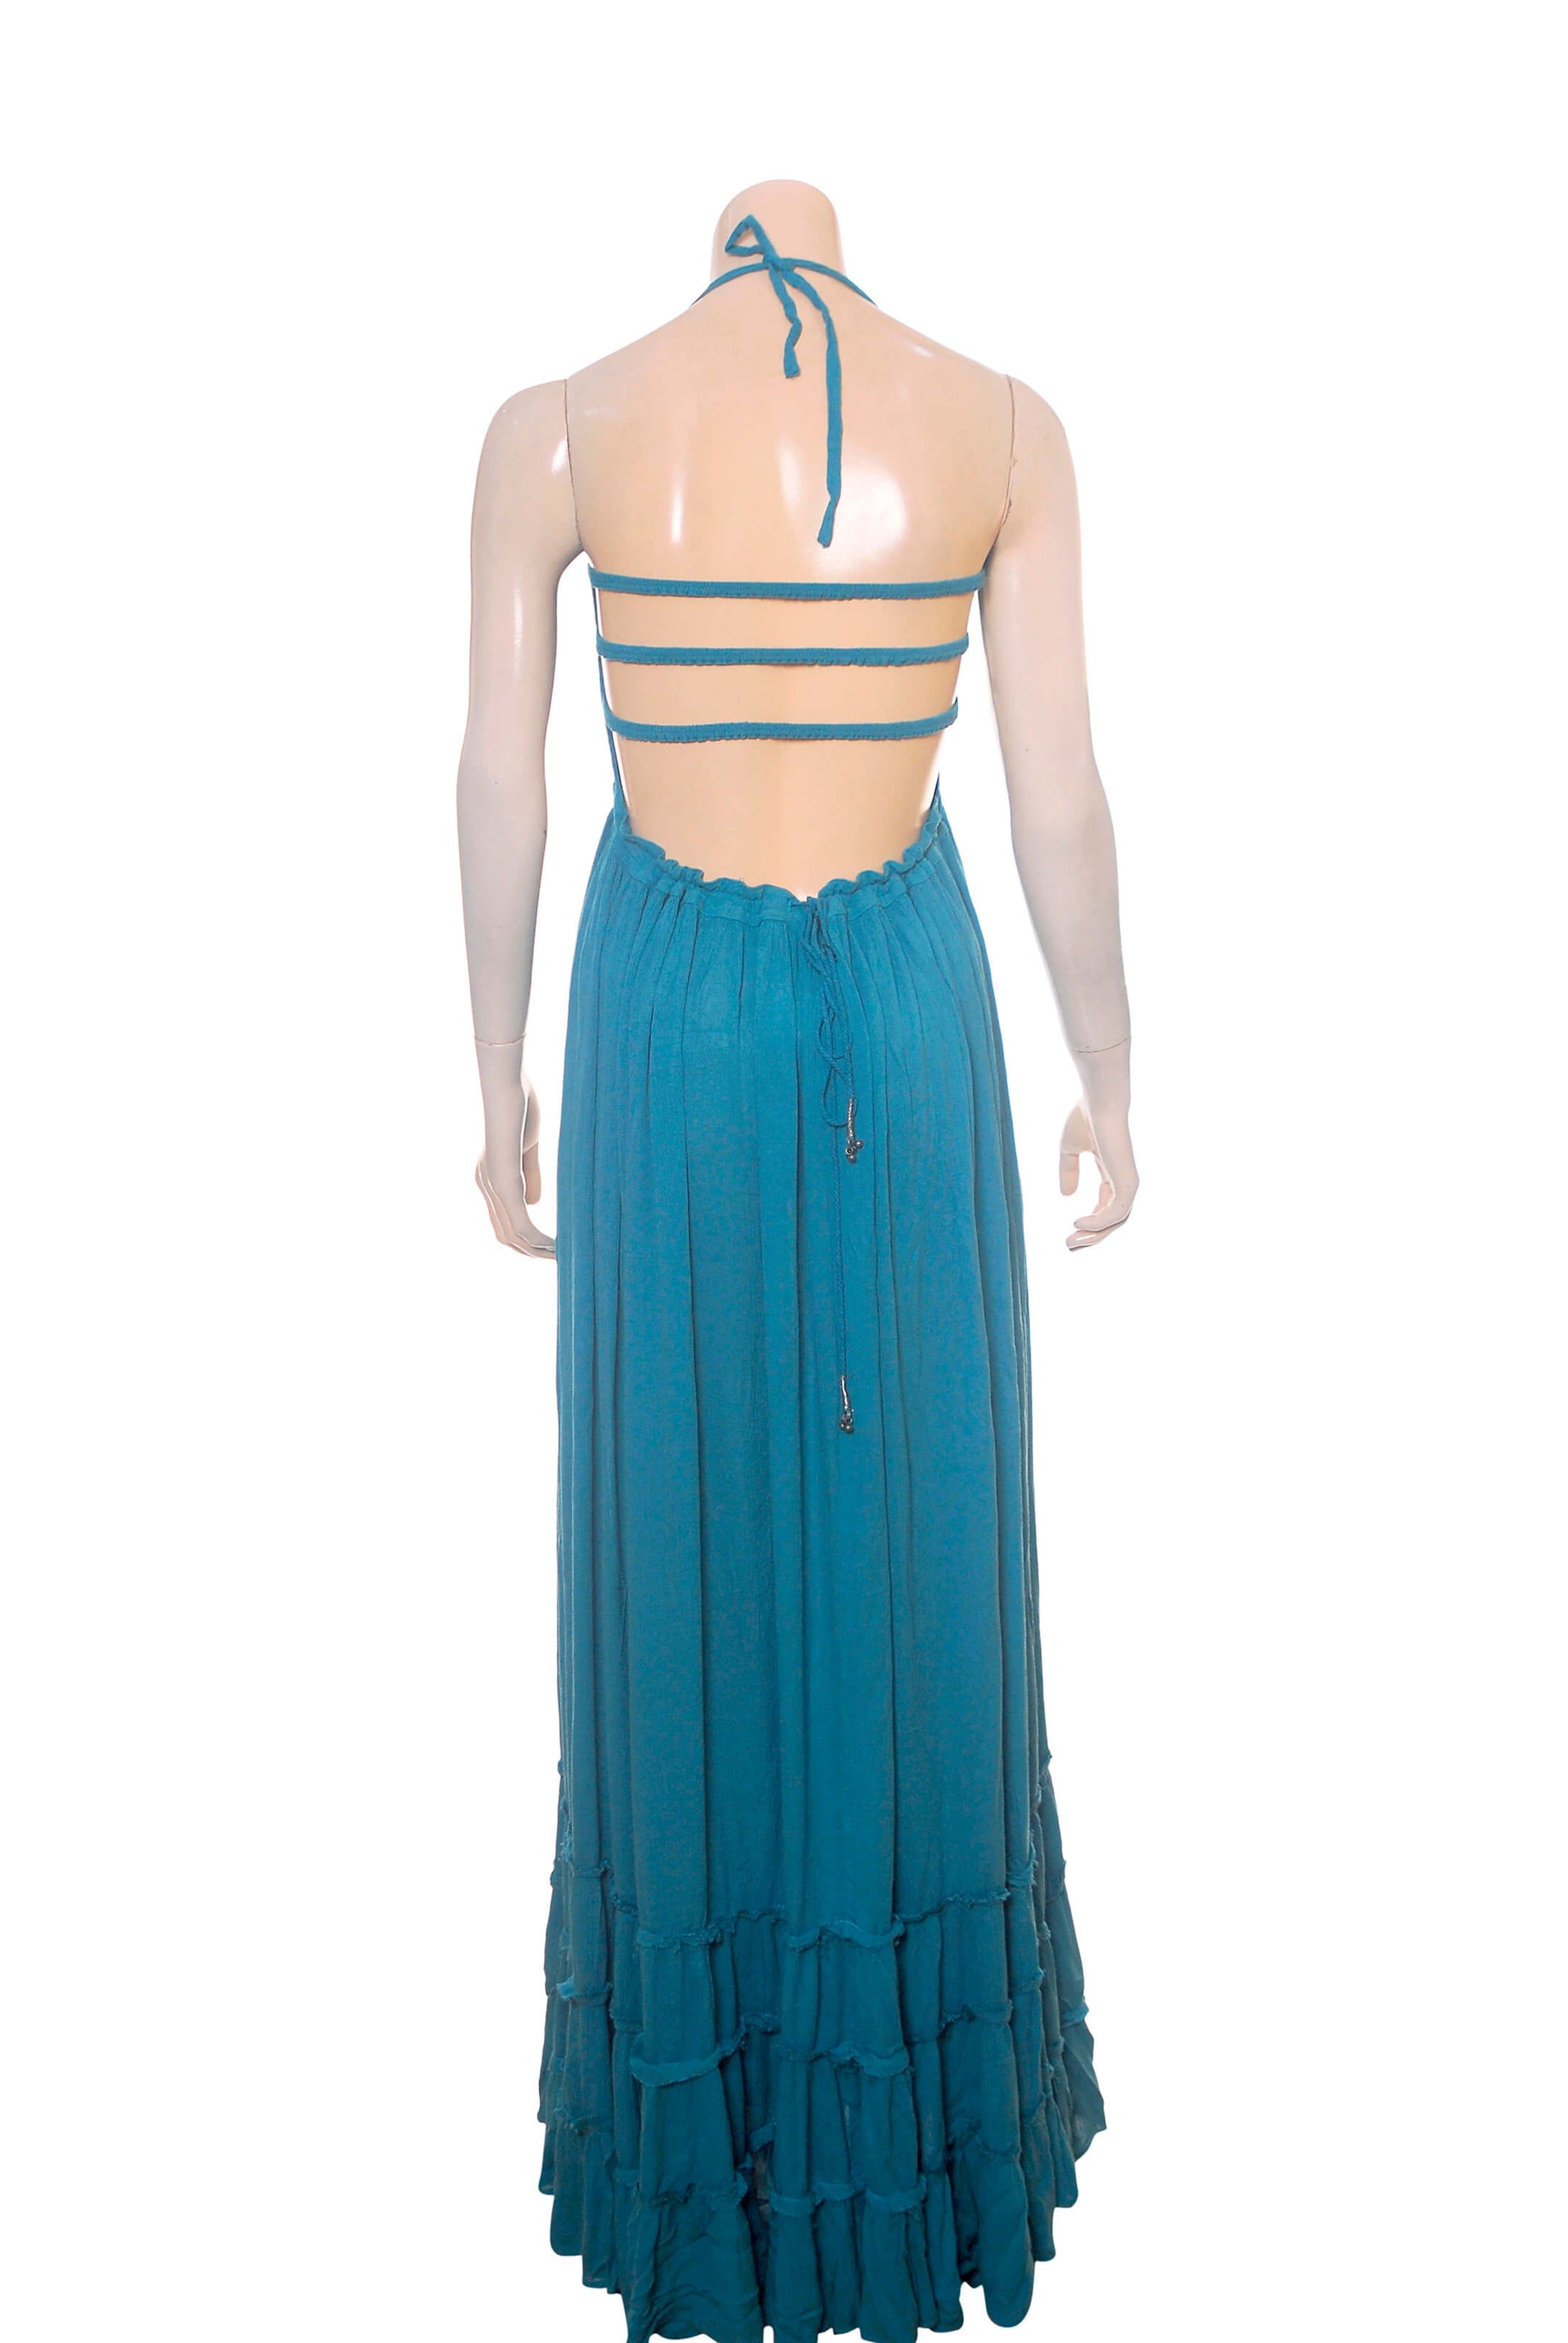 Free People Extratropical Maxi Dress